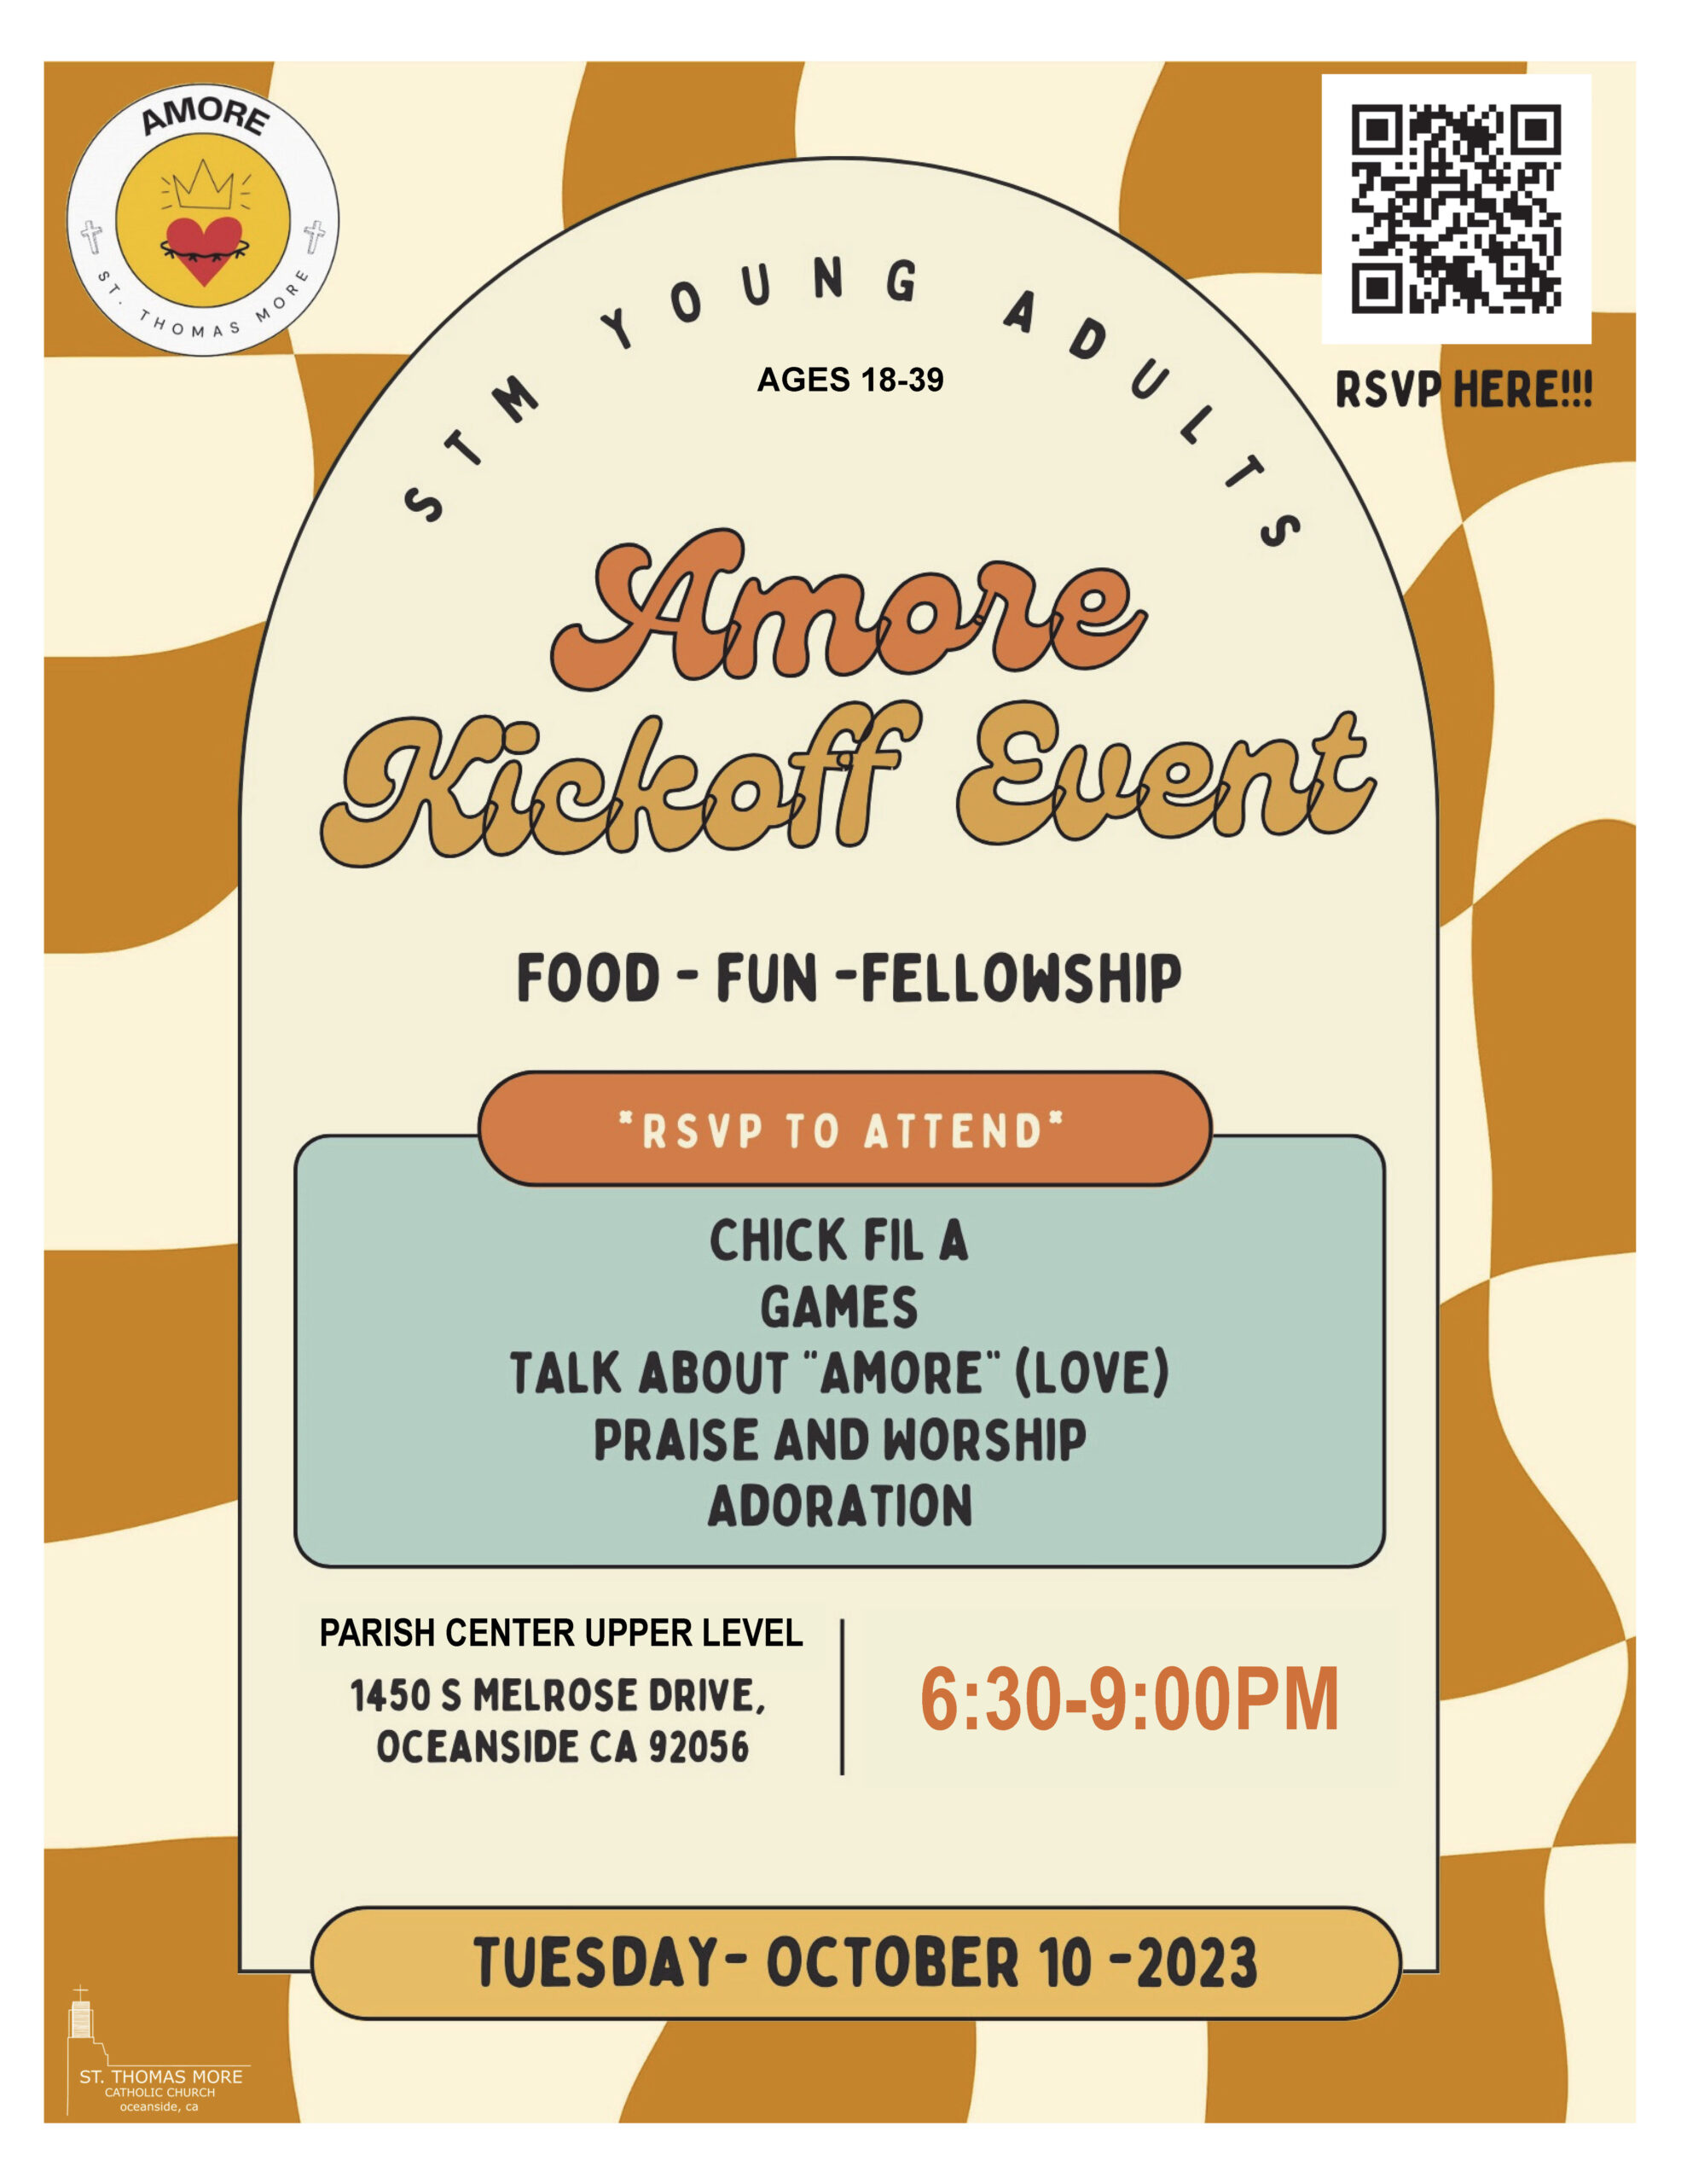 Amore Young Adults Group Starts October 10